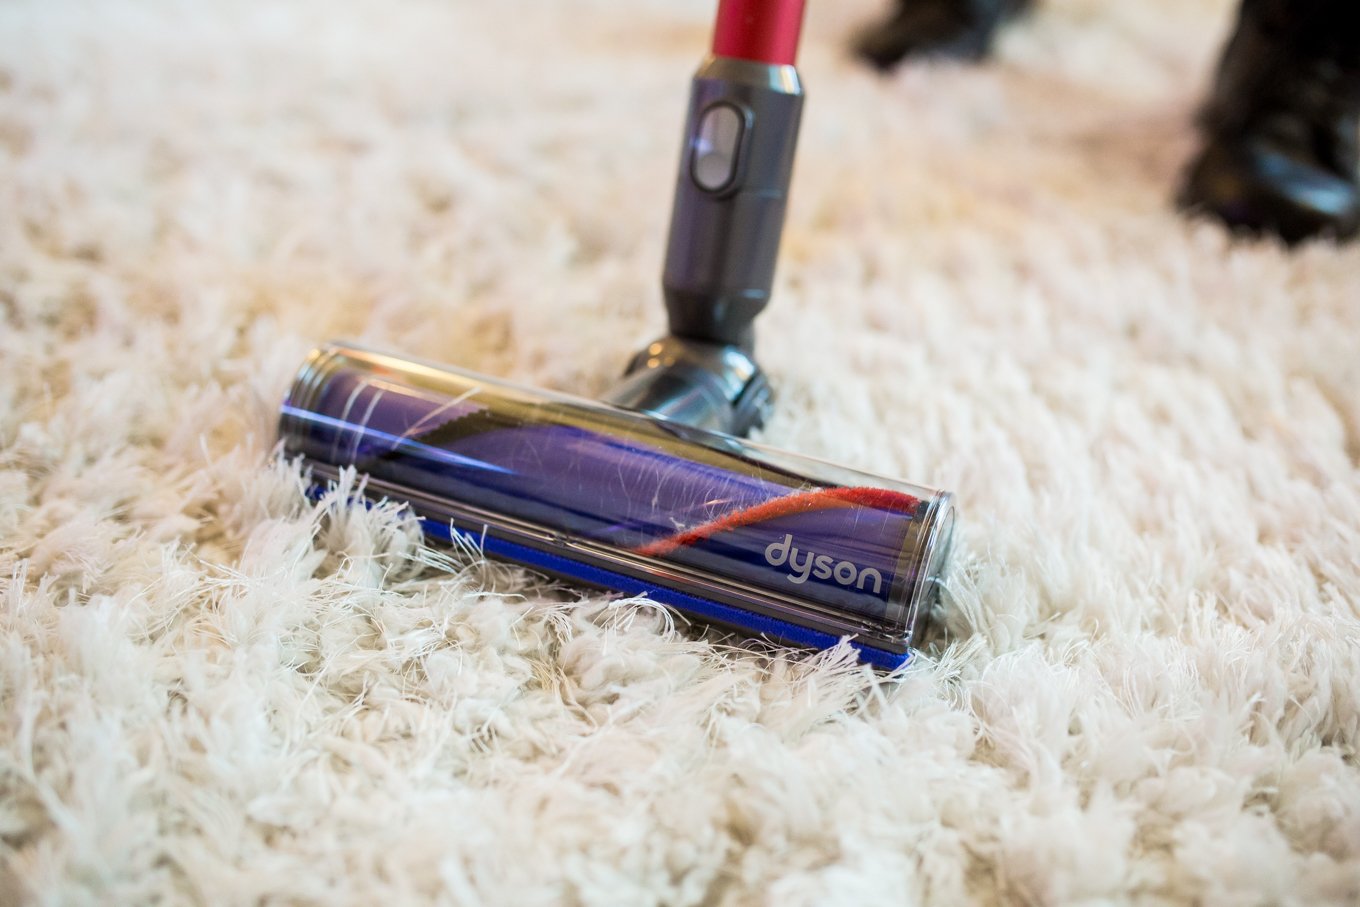 dyson cordless vacuums, how to clean your apartment, tips for apartment cleaning, dyson vacuums, mens lifestyle blog